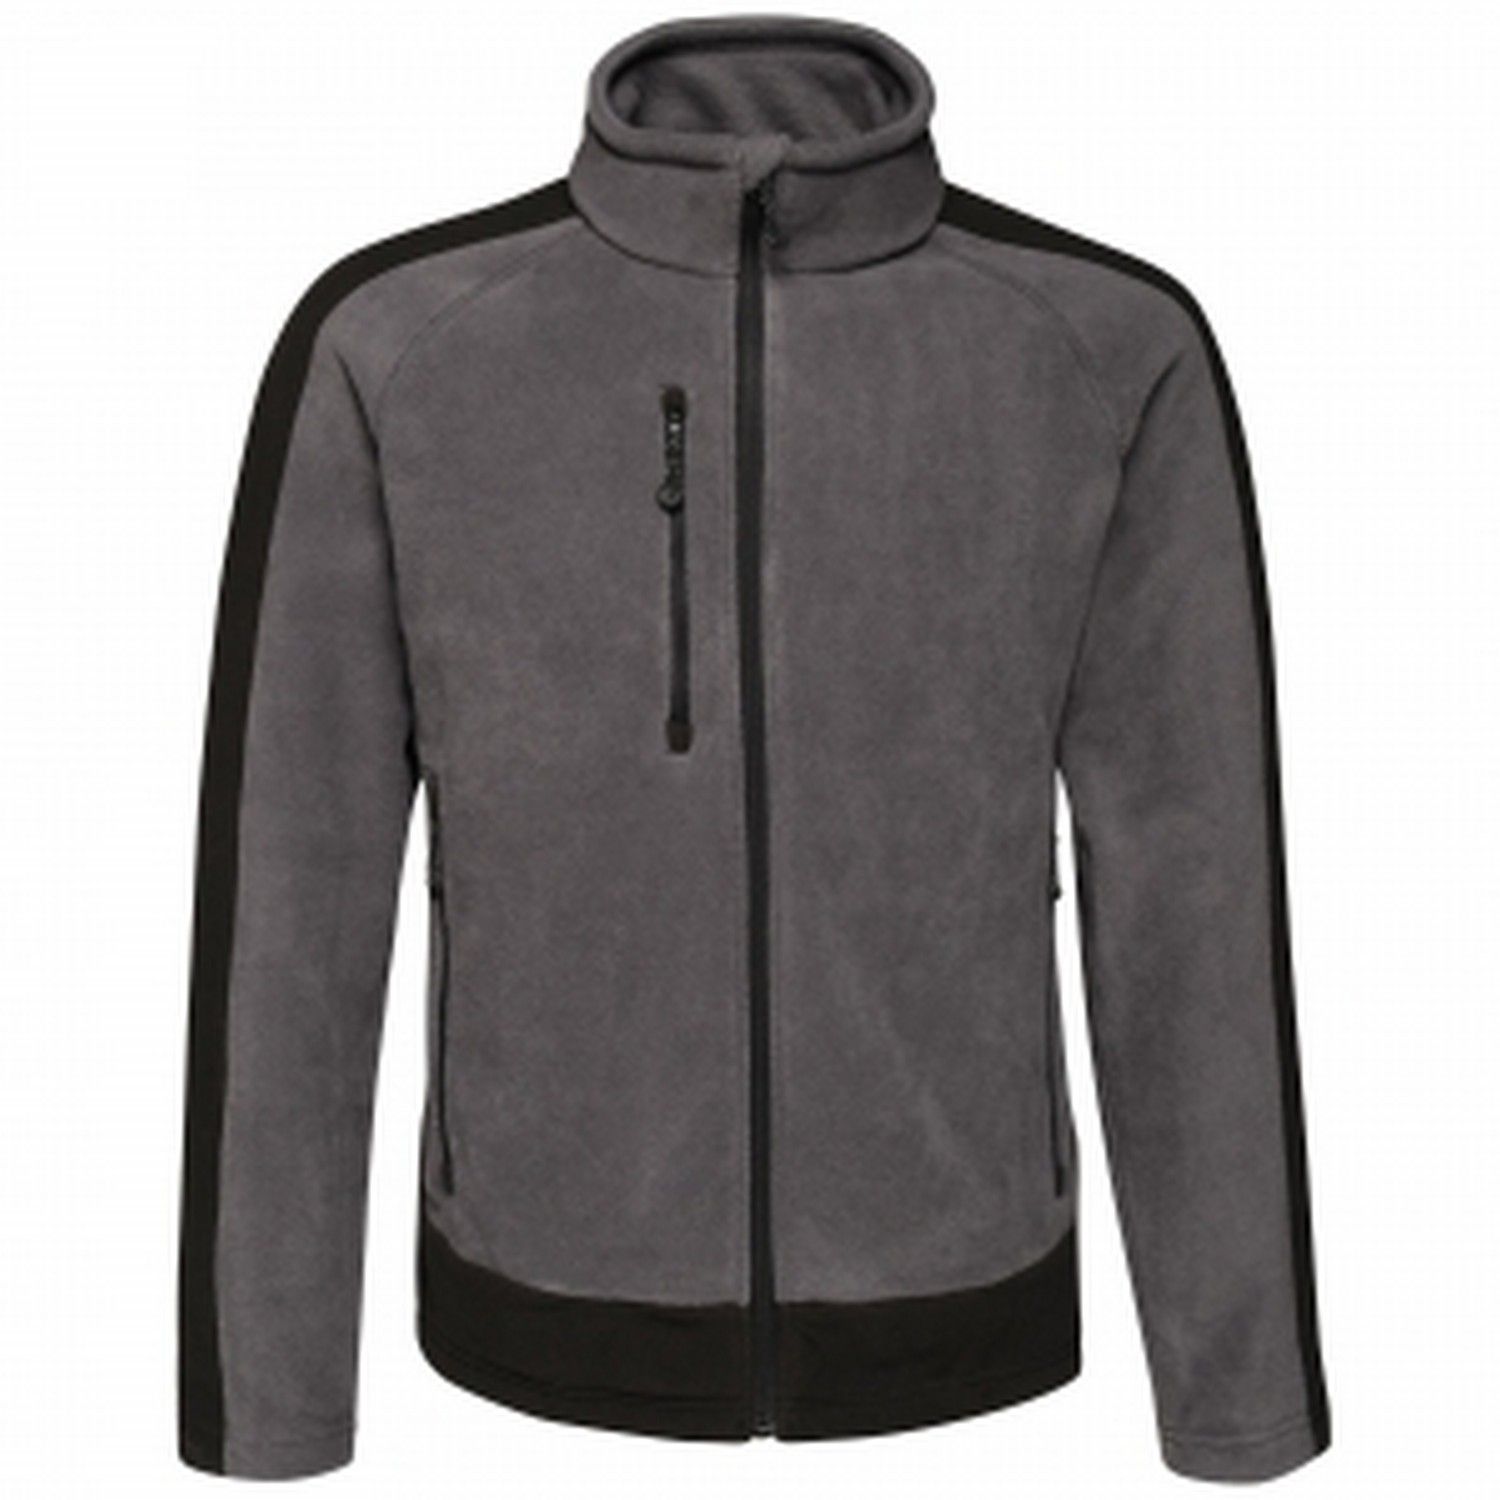 100% Polyester. Anti-pill fleece. Adjustable shockcord hem. Inner zip & chin guard. 1 zipped chest pocket, 2 zipped lower pockets. Interactive attachment loops at cuffs.